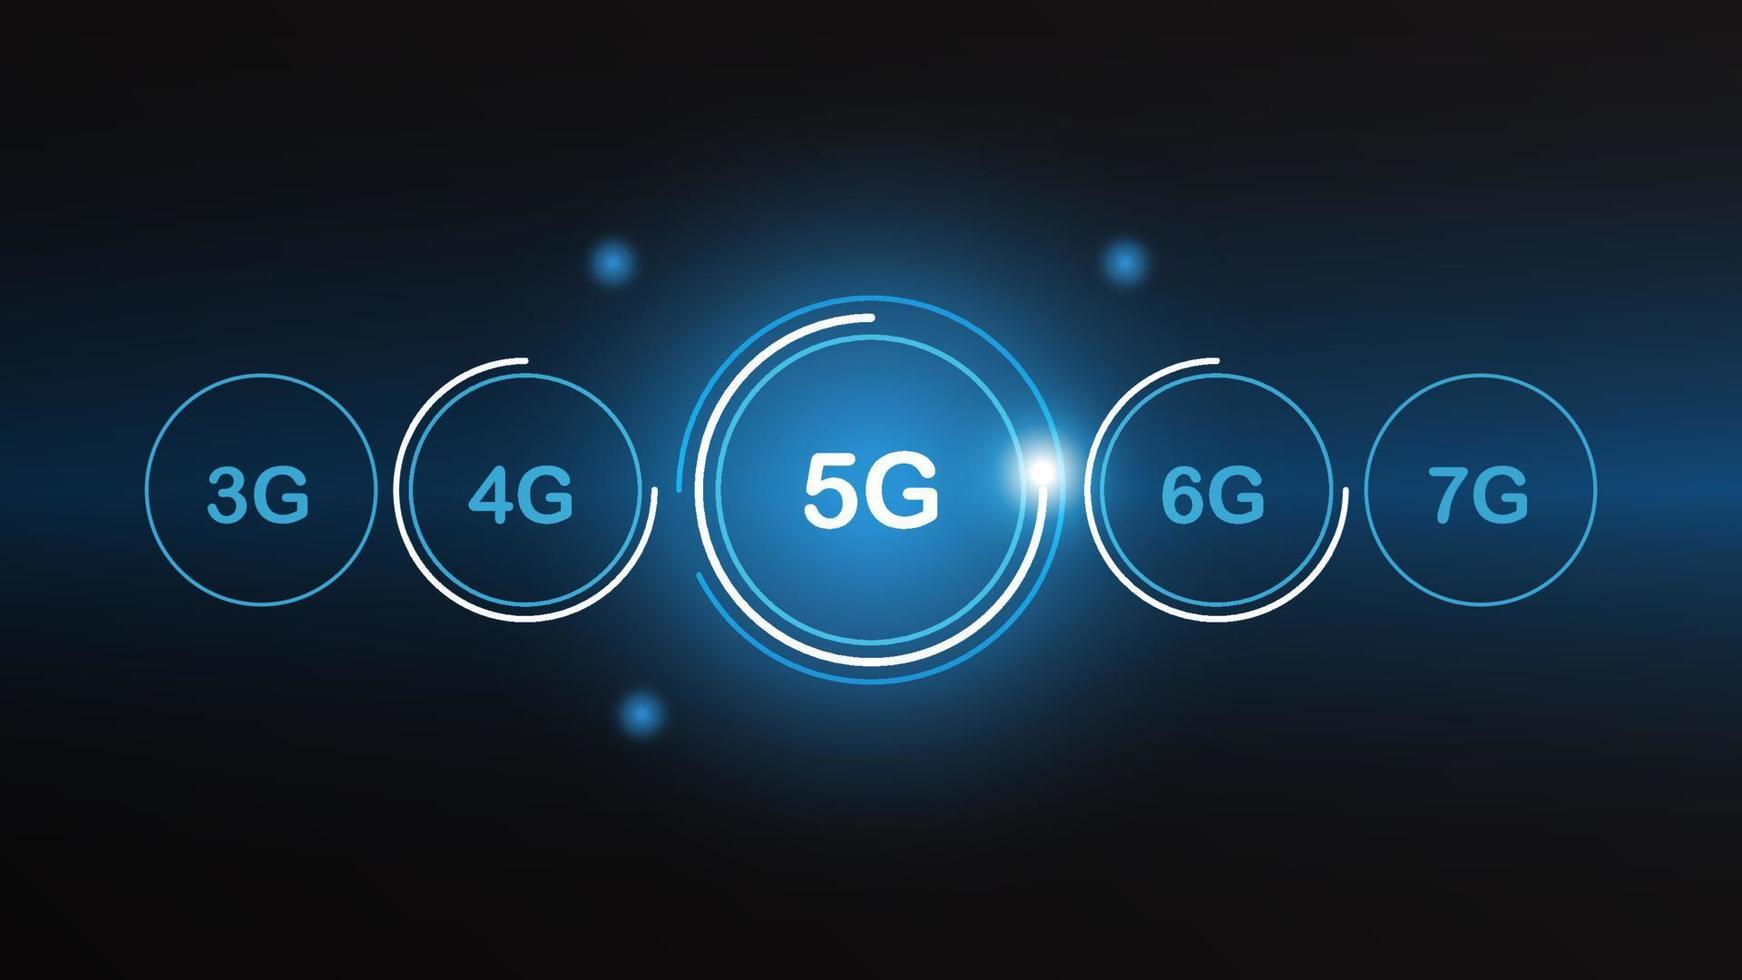 5G network technology background concept. 5G wireless Wi-fi connection internet, data, circle line, lights, technology Abstract, vector. 5G for web banner, web site, communication, transformation. vector